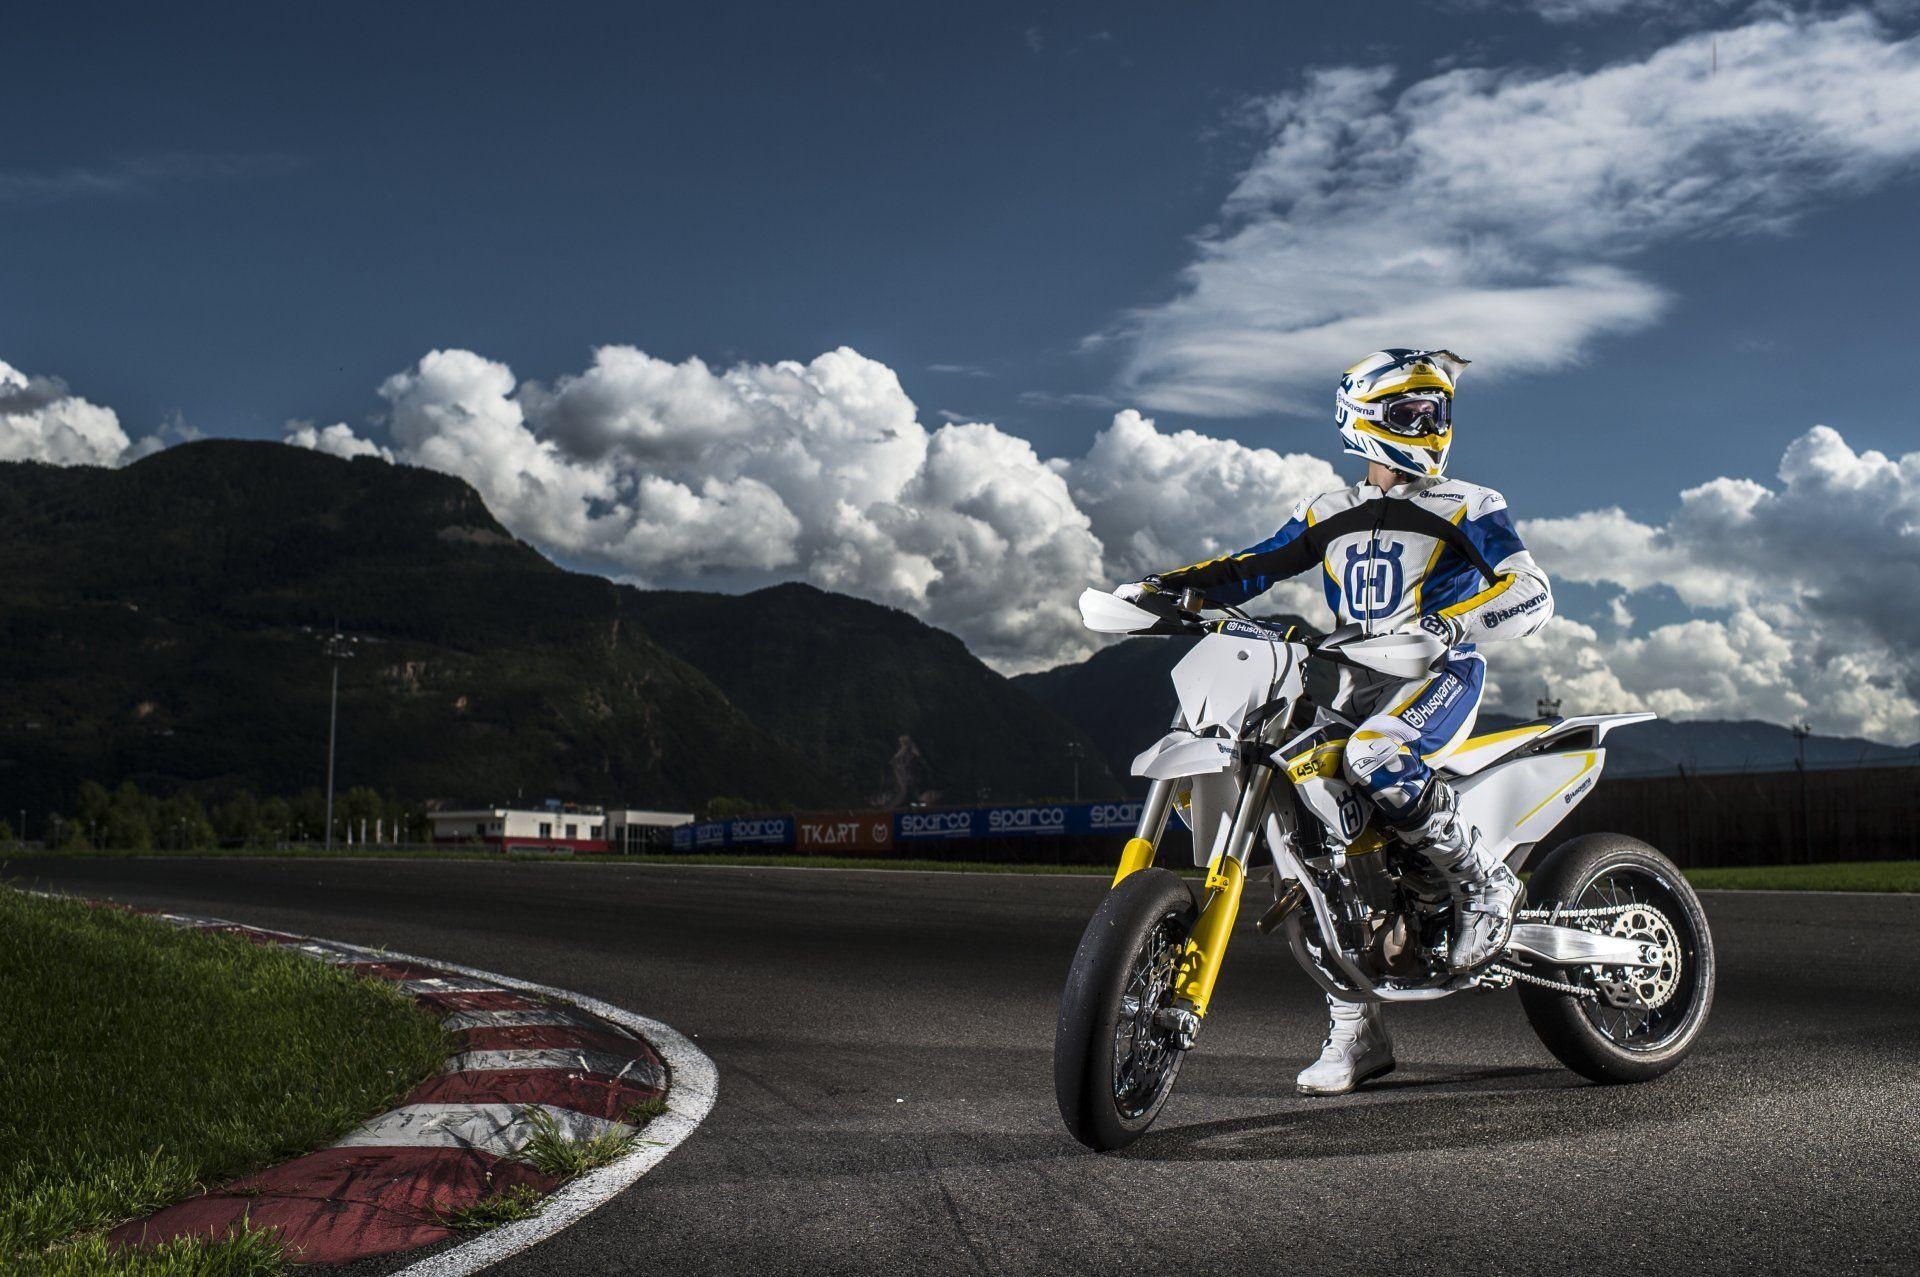 Supermoto: Husqvarna, A lightweight, air-cooled, easy-handling motorcycle. 1920x1280 HD Background.